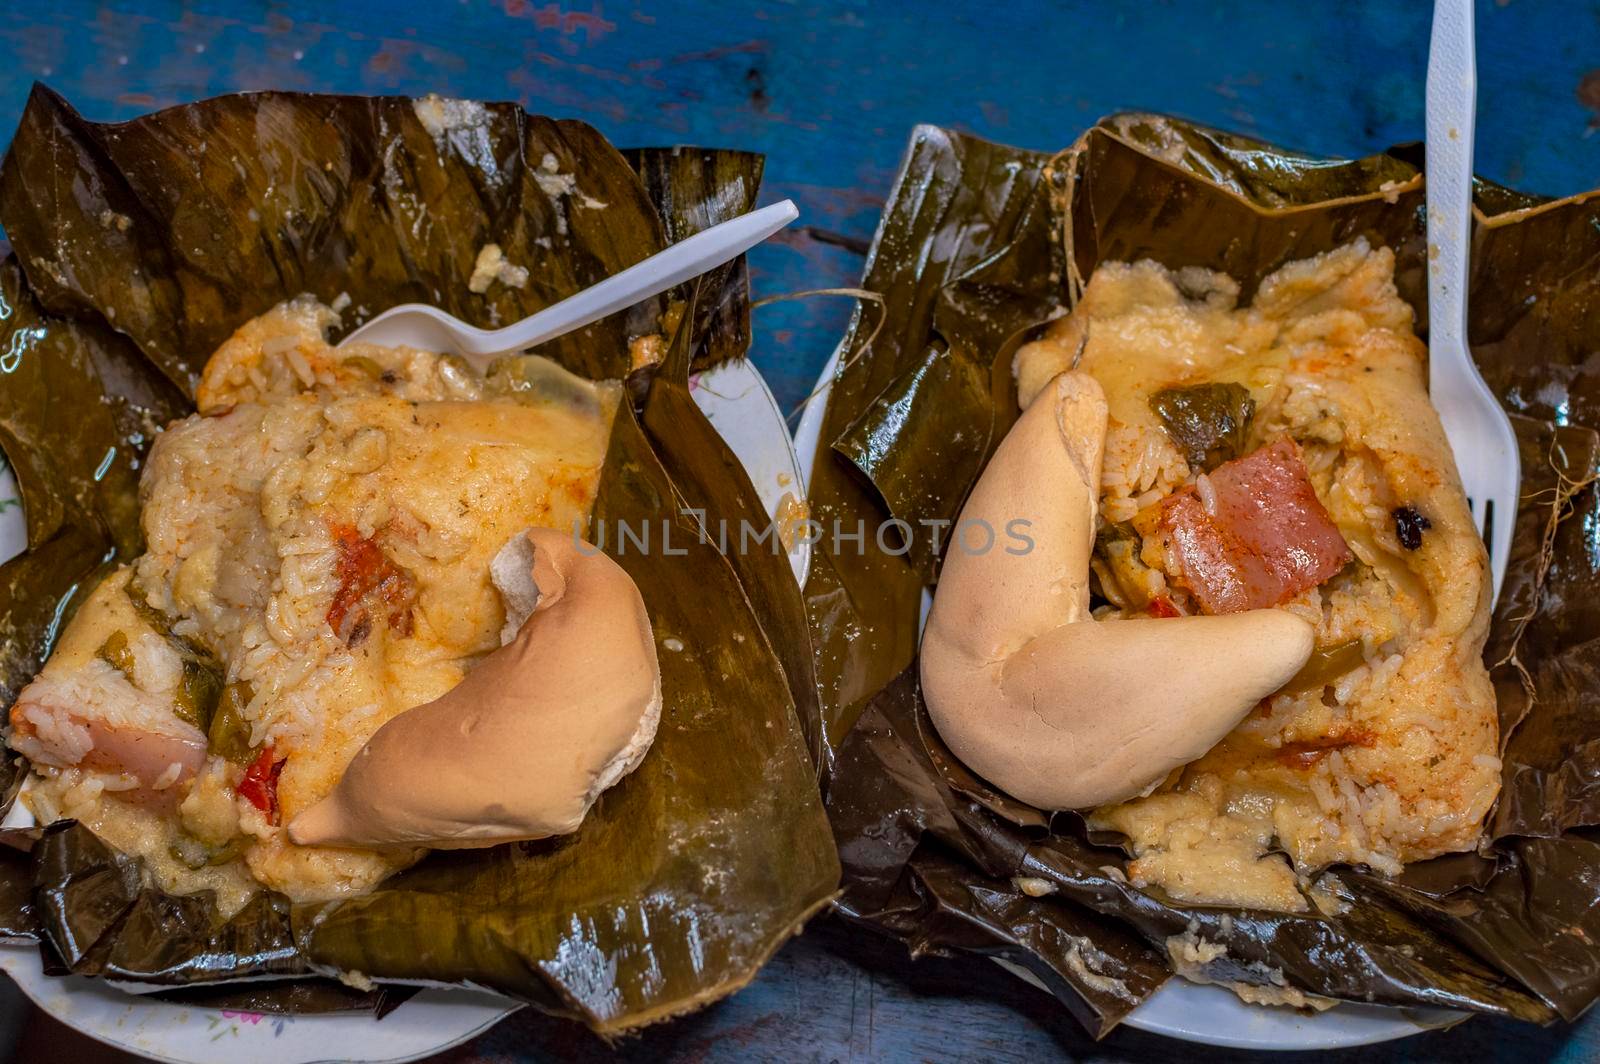 Two Nacatamales served in a banana leaf on the table. Top view of two traditional Nacatamales served on banana leaf, Two Nacatamales with bread served on the table, Venezuelan Hallaca served by isaiphoto